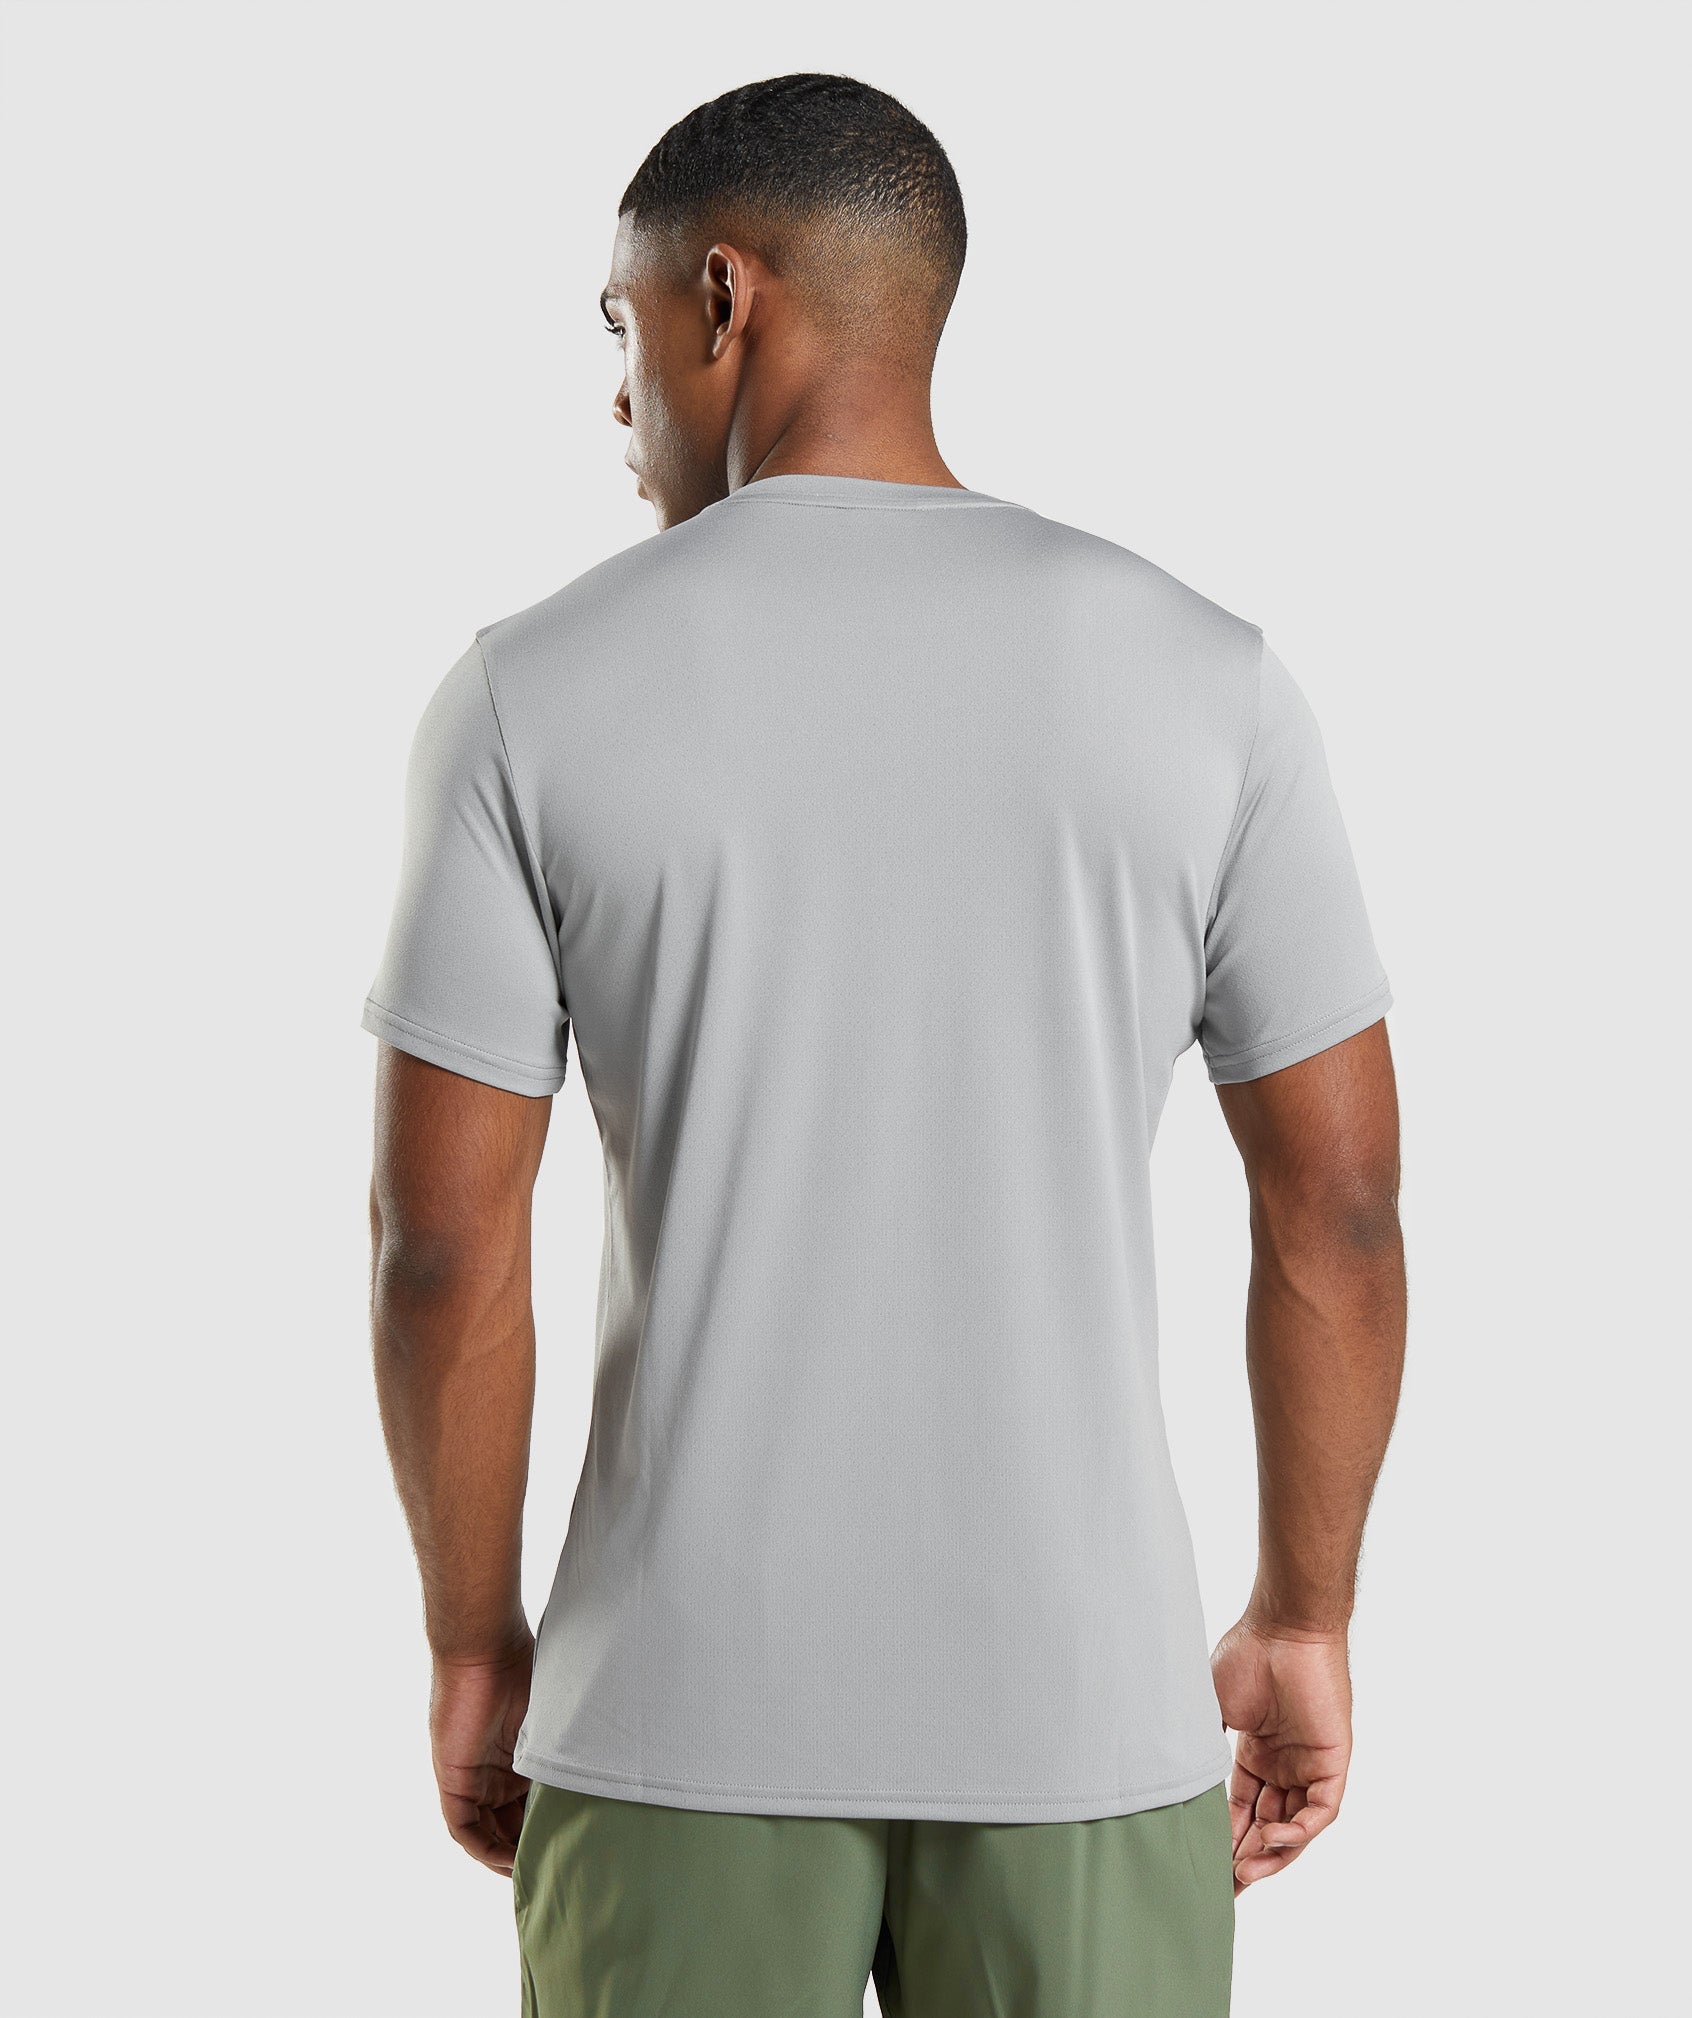 Arrival T-Shirt in Smokey Grey - view 3